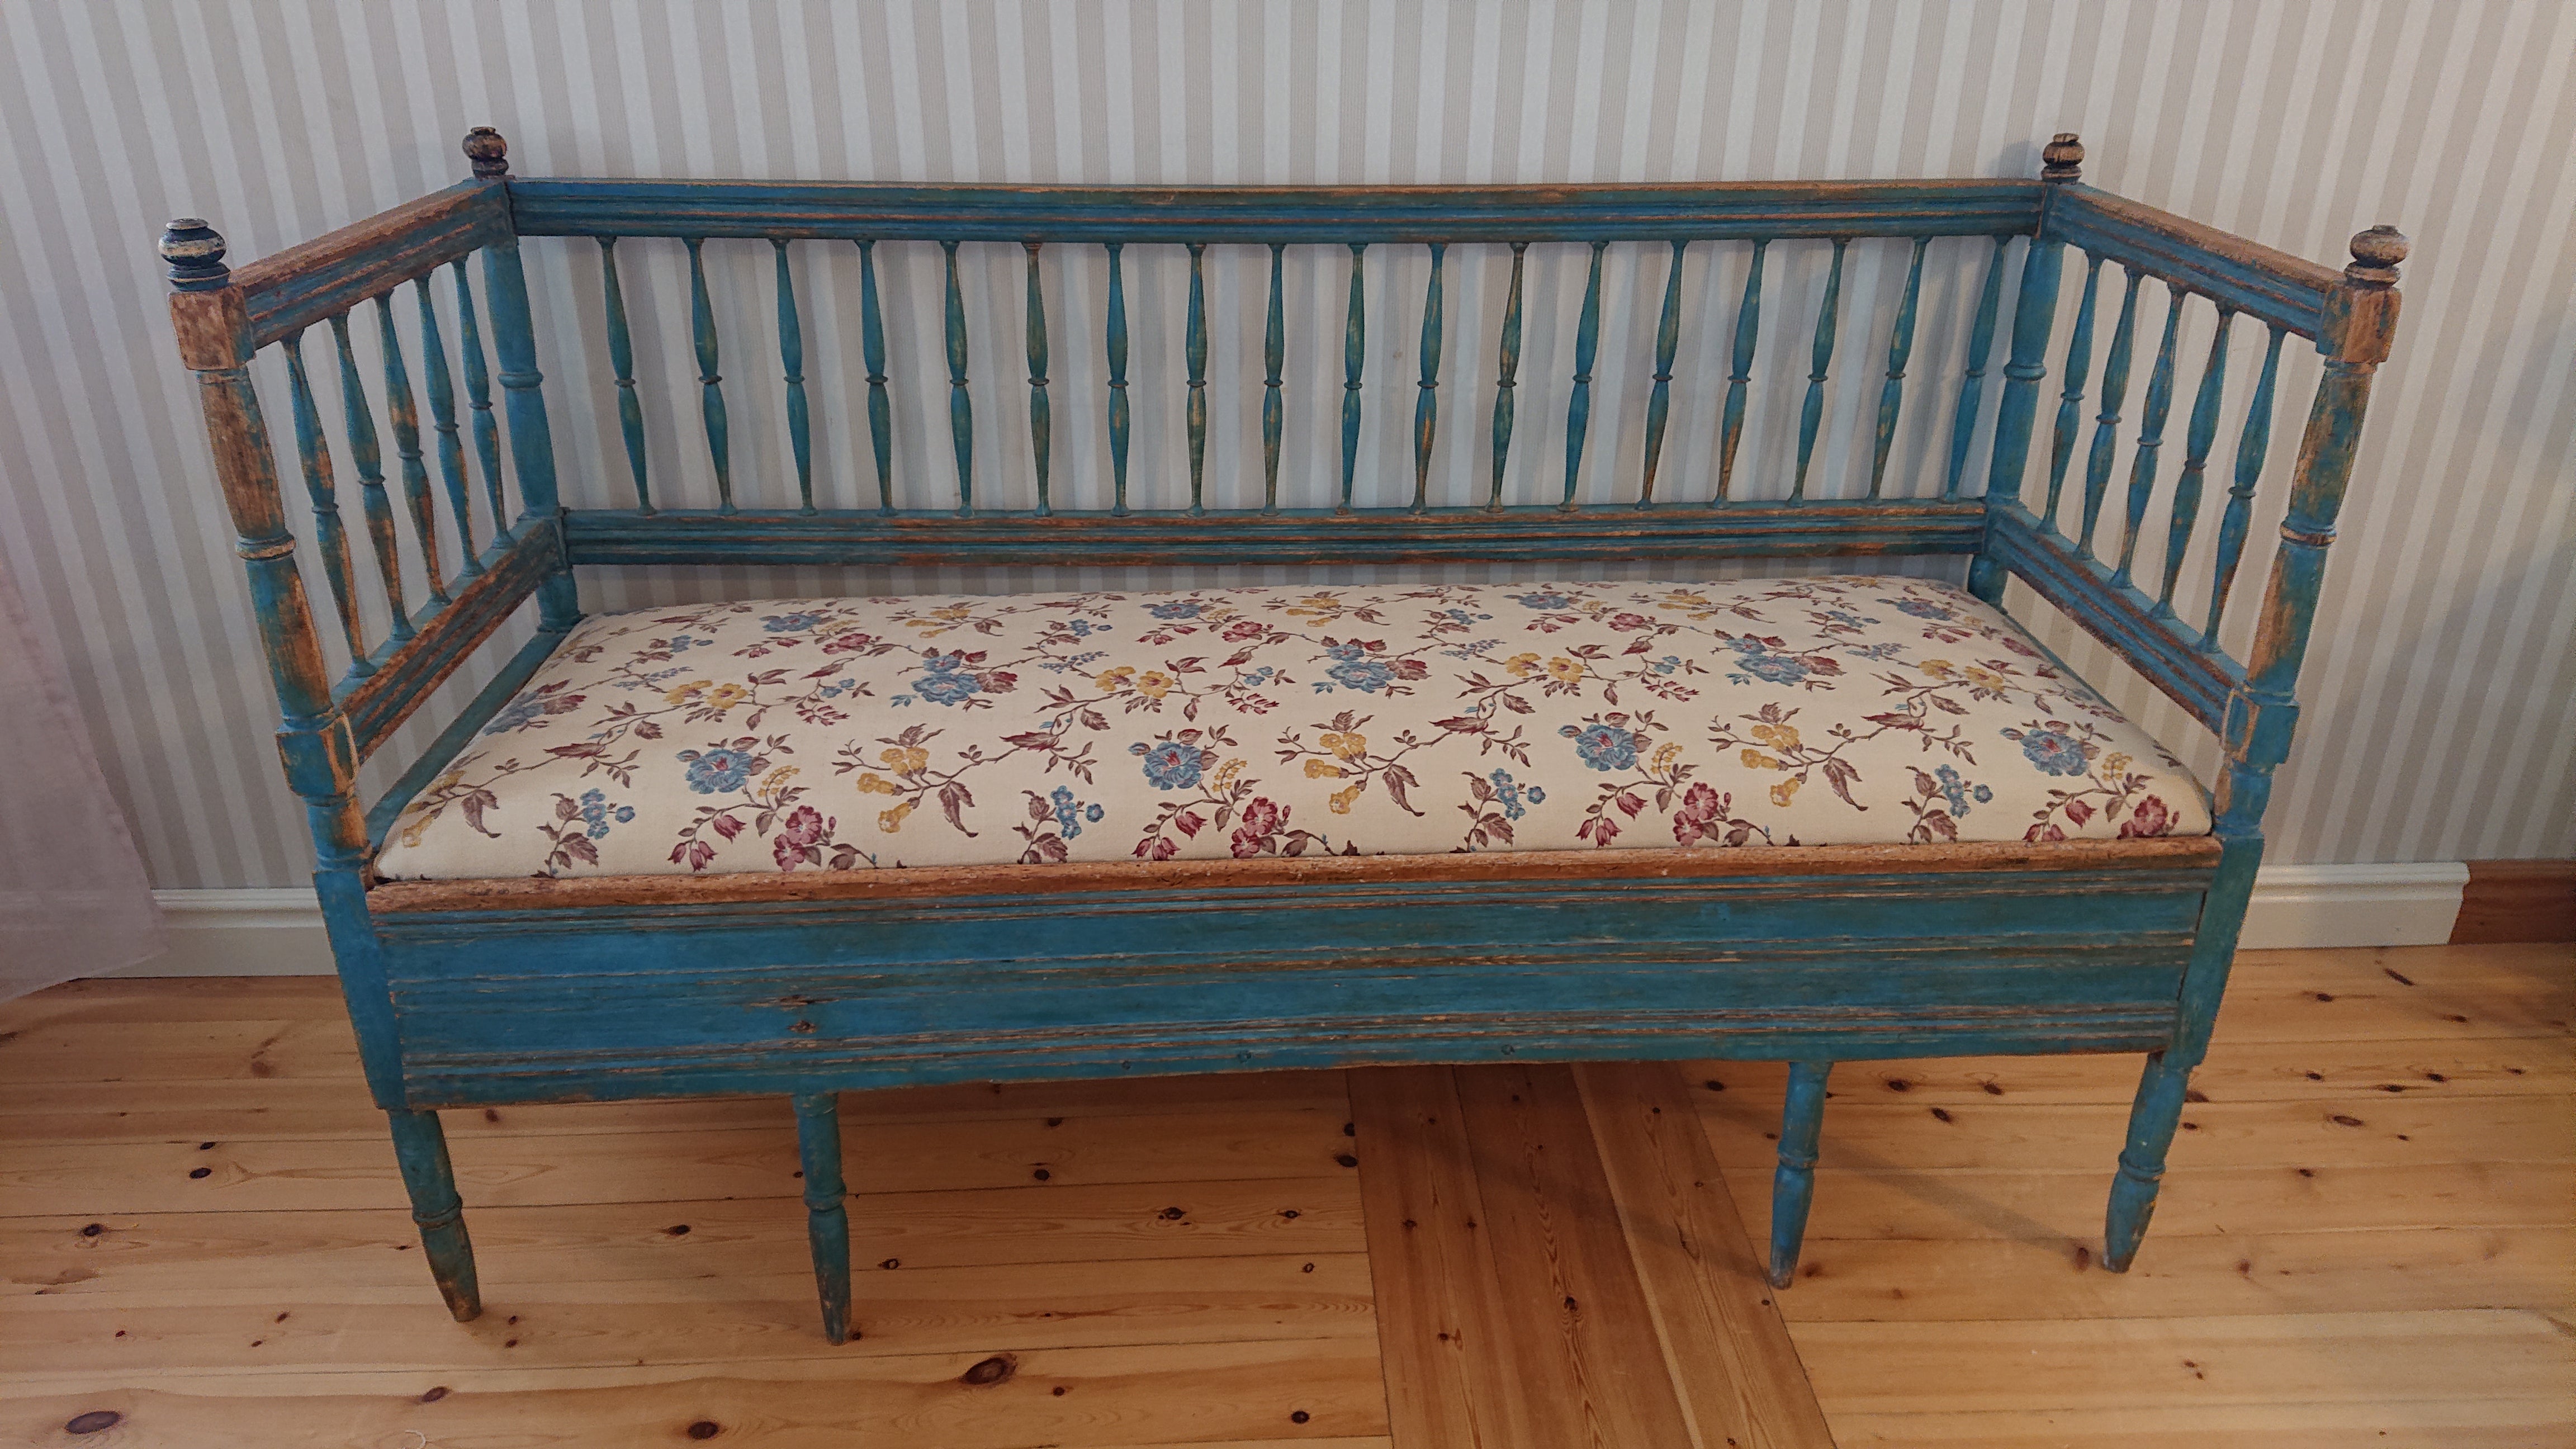 Early 19th Century  Antique Rustic Swedish Gustavian Provincial Sofa from Råneå Norrbotten ,Northern Sweden.
A beautiful Swedish Gustavian sofa which has been hand-scraped back to its 
 well preserved original colour.
The sofa has a lovely blue